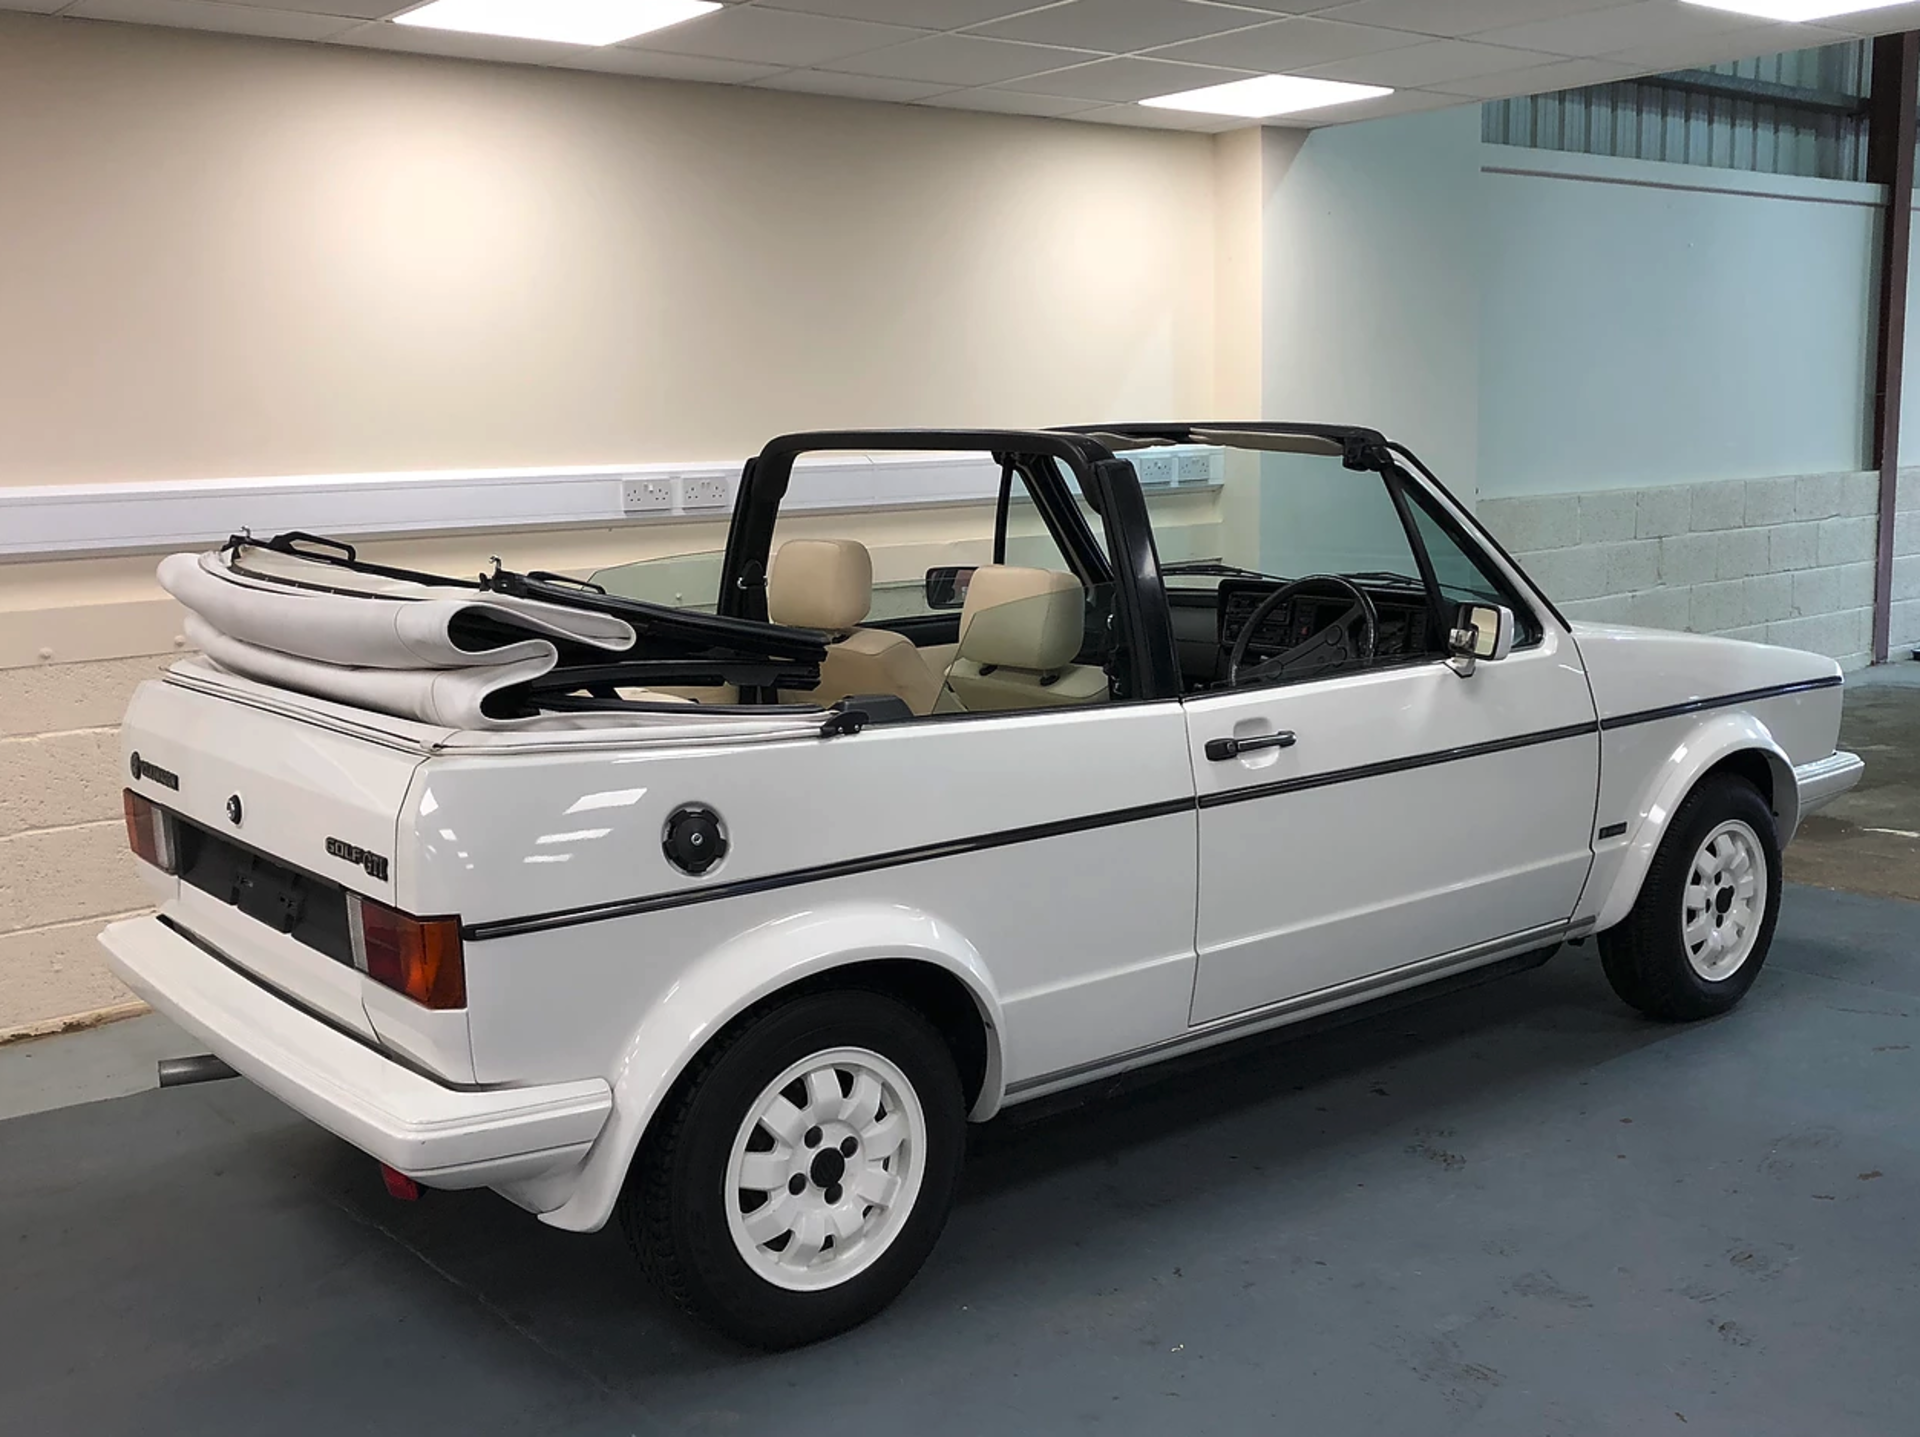 1984 Golf GTI MK1 Convertible - Very low miles & only 3 previous owners. - Image 4 of 13